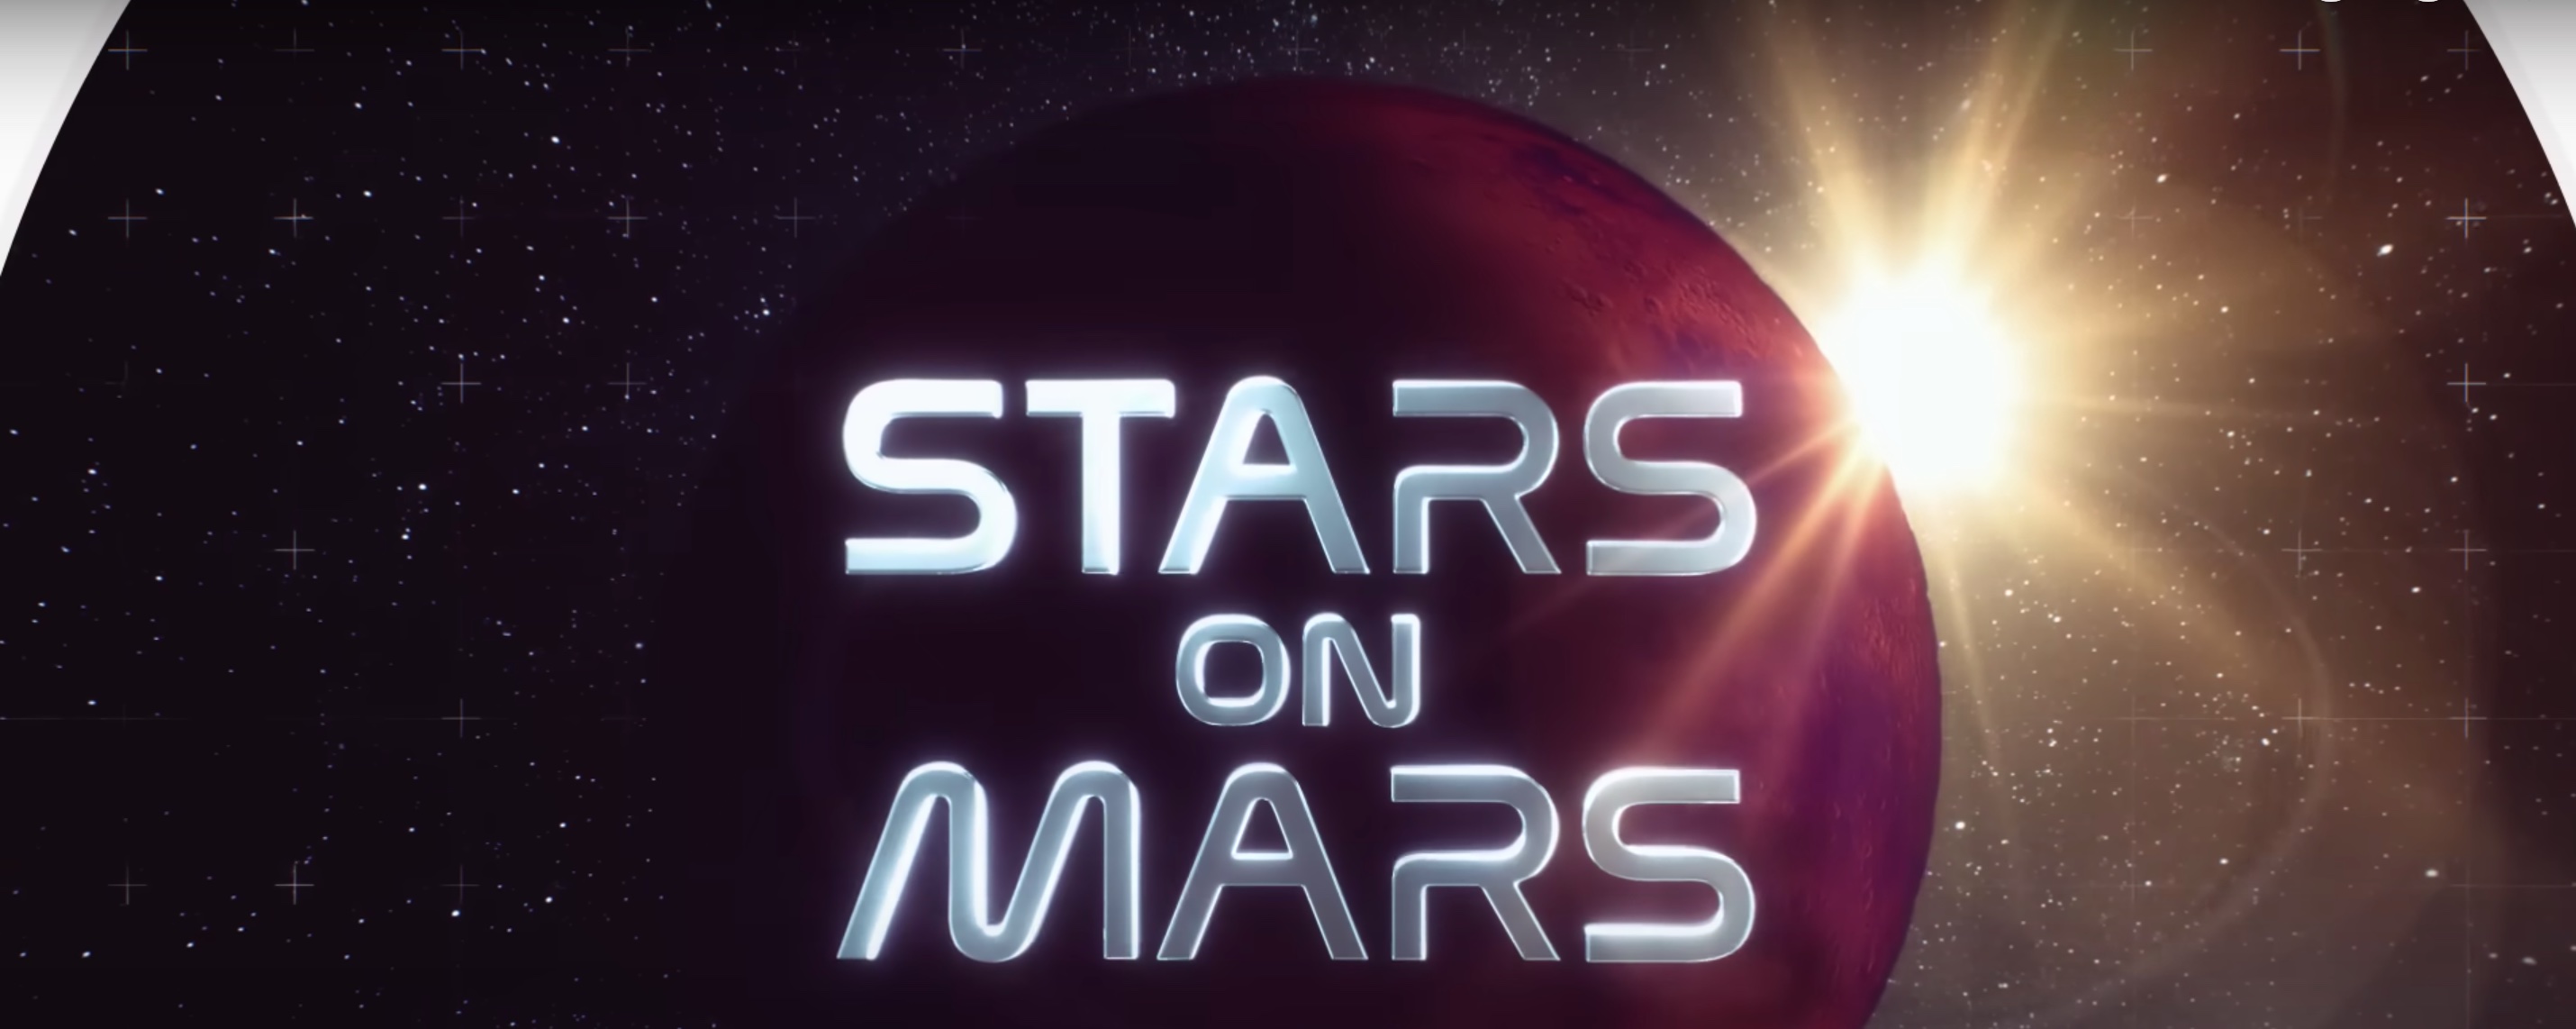 ’Stars on Mars’ Air Date, Cast, More: Series Details